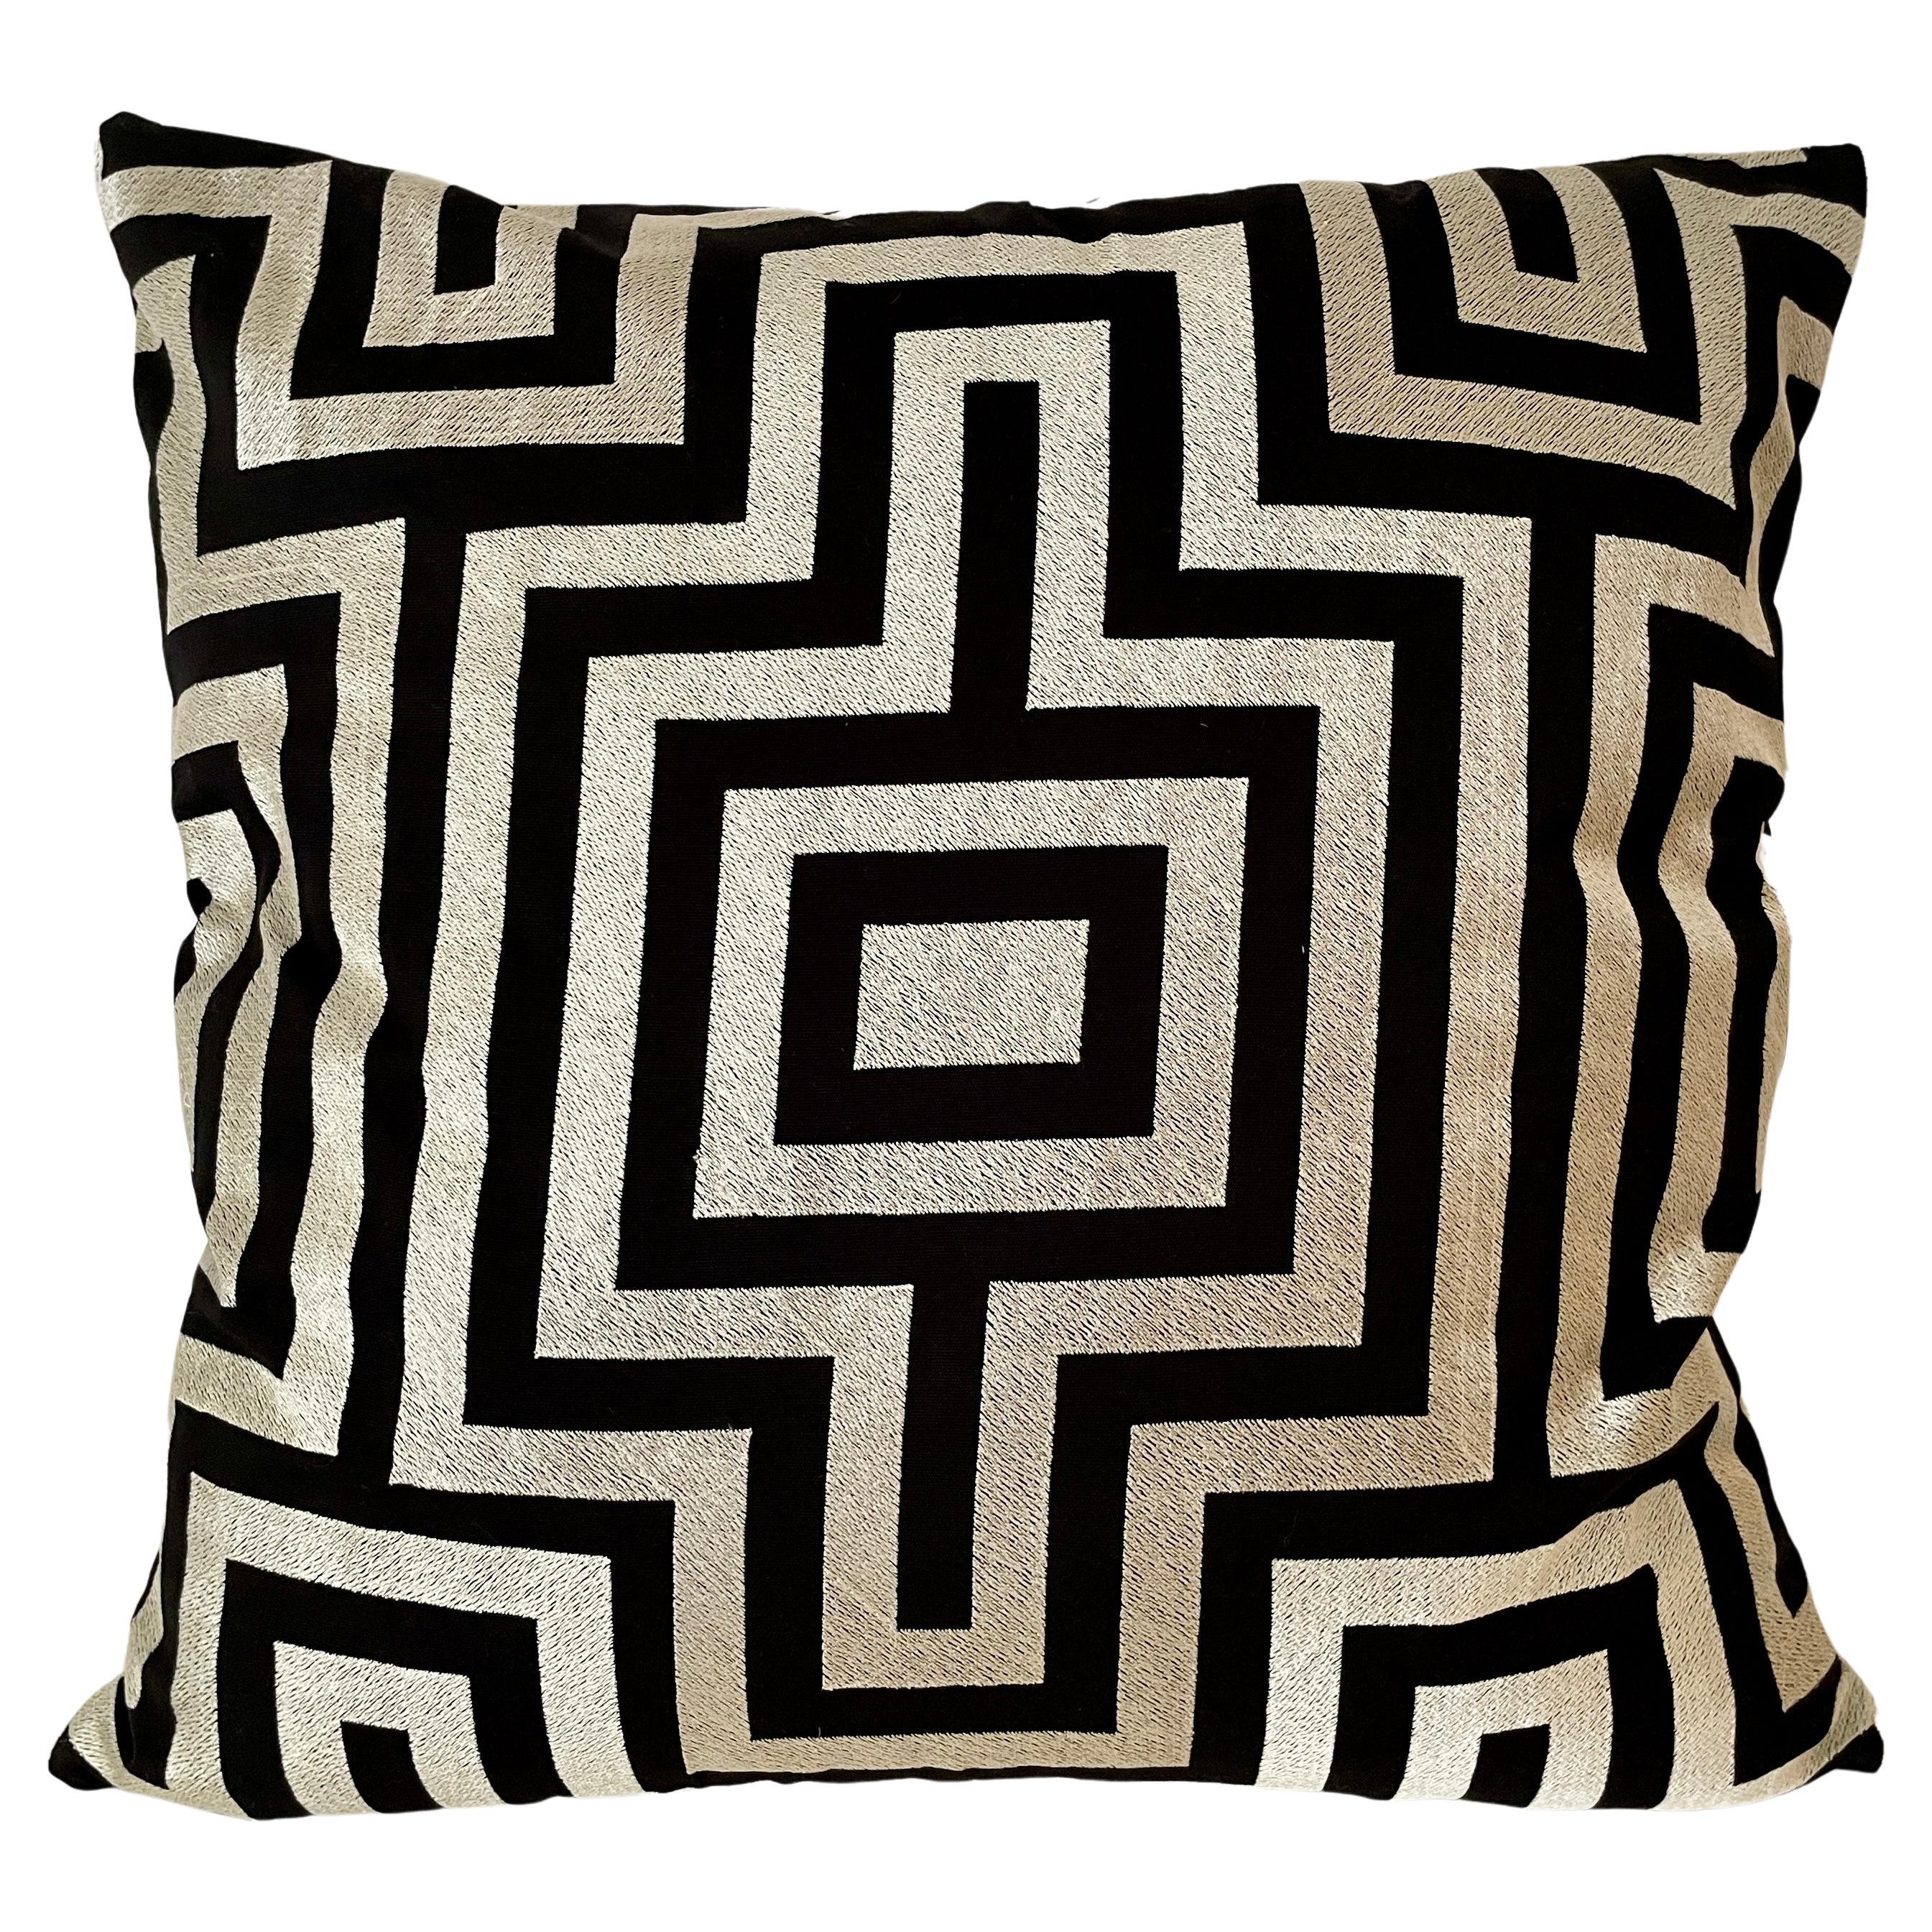 Hand Embroidered Geometric Pattern All Down Pillow For Sale